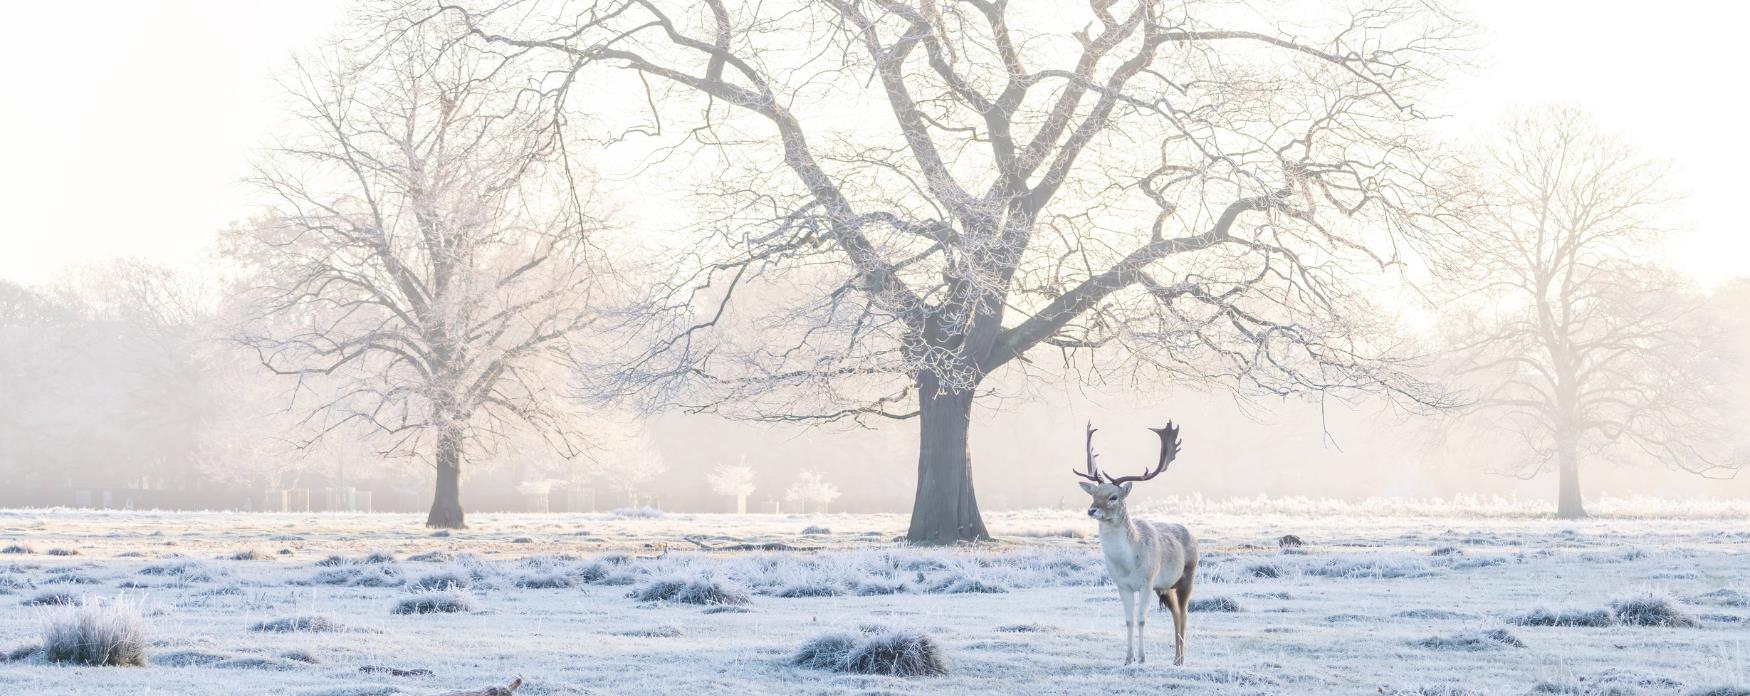 An image of a deer during Winter in Bushy Park